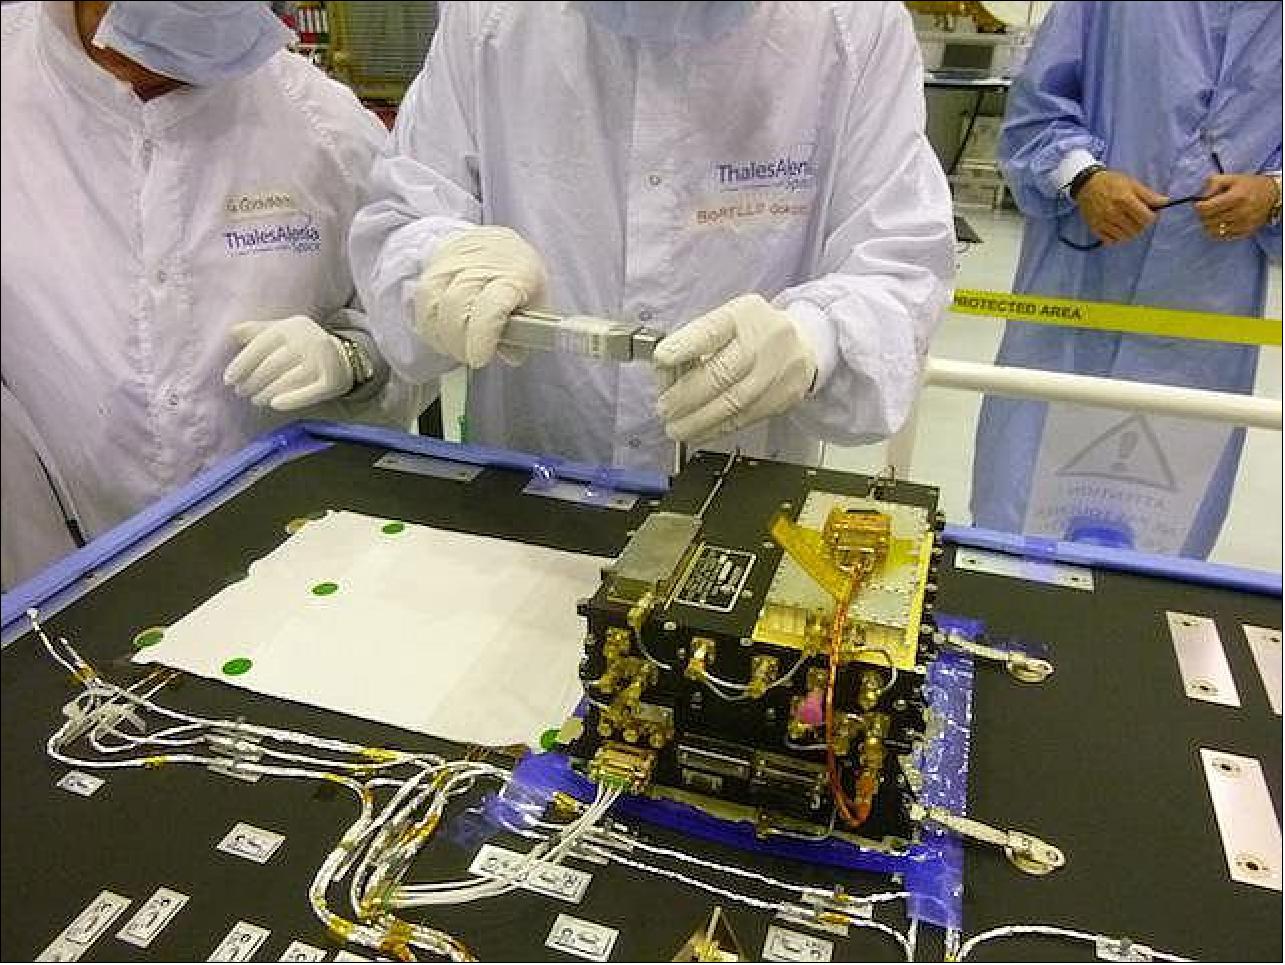 Figure 2: This image shows a step in installation and testing of the first of the orbiter's Electra radios, inside a clean room at Thales Alenia Space, in Cannes, France, in June 2014 (image credit: NASA/JPL-Caltech/ESA/TAS) 10)